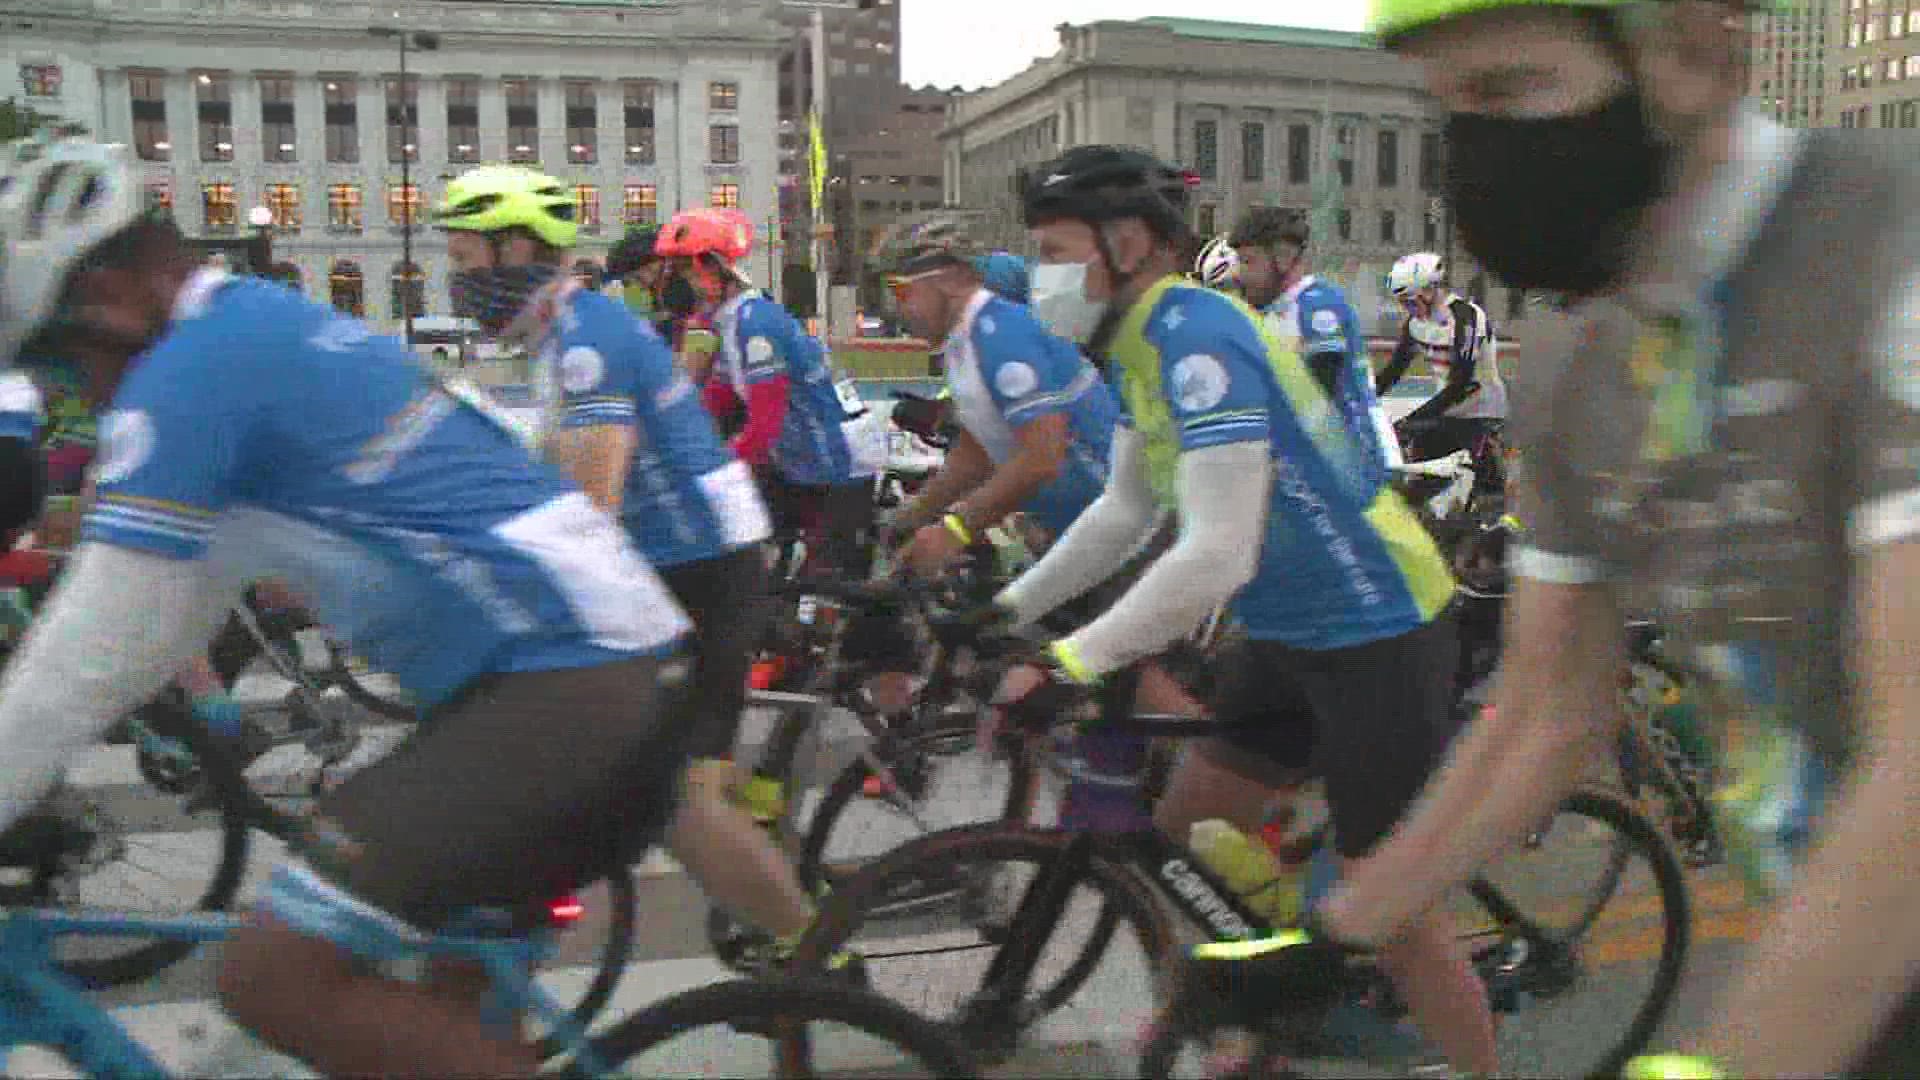 2022 Bike to Ride event where 100% of proceeds go to Cleveland Clinic cancer research.